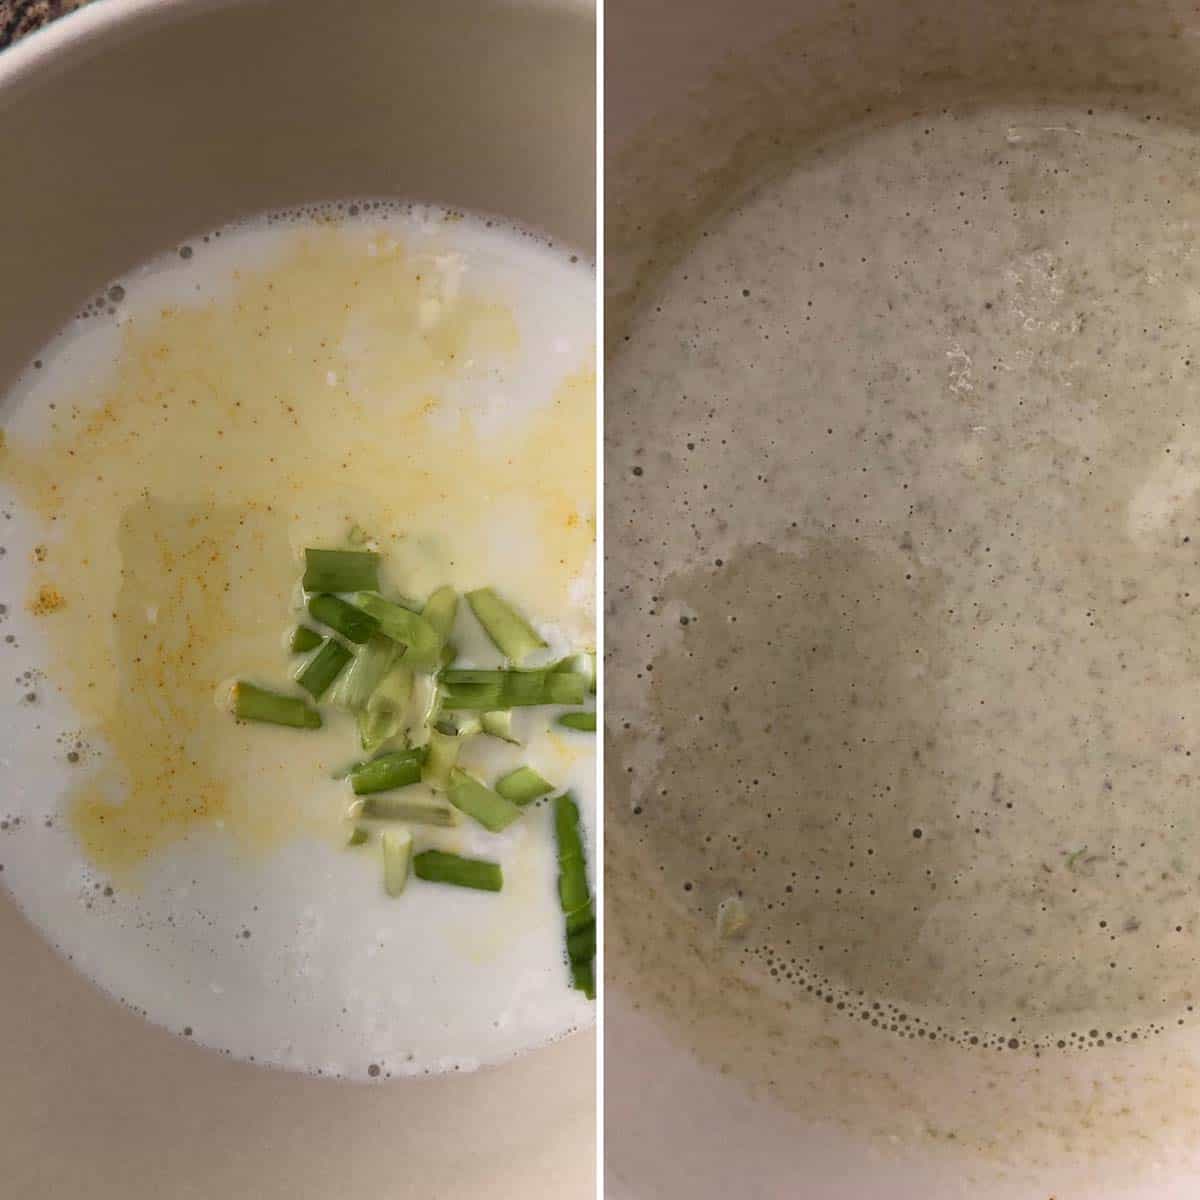 2 panel photo showing the addition of coconut milk and turmeric to make the batter.